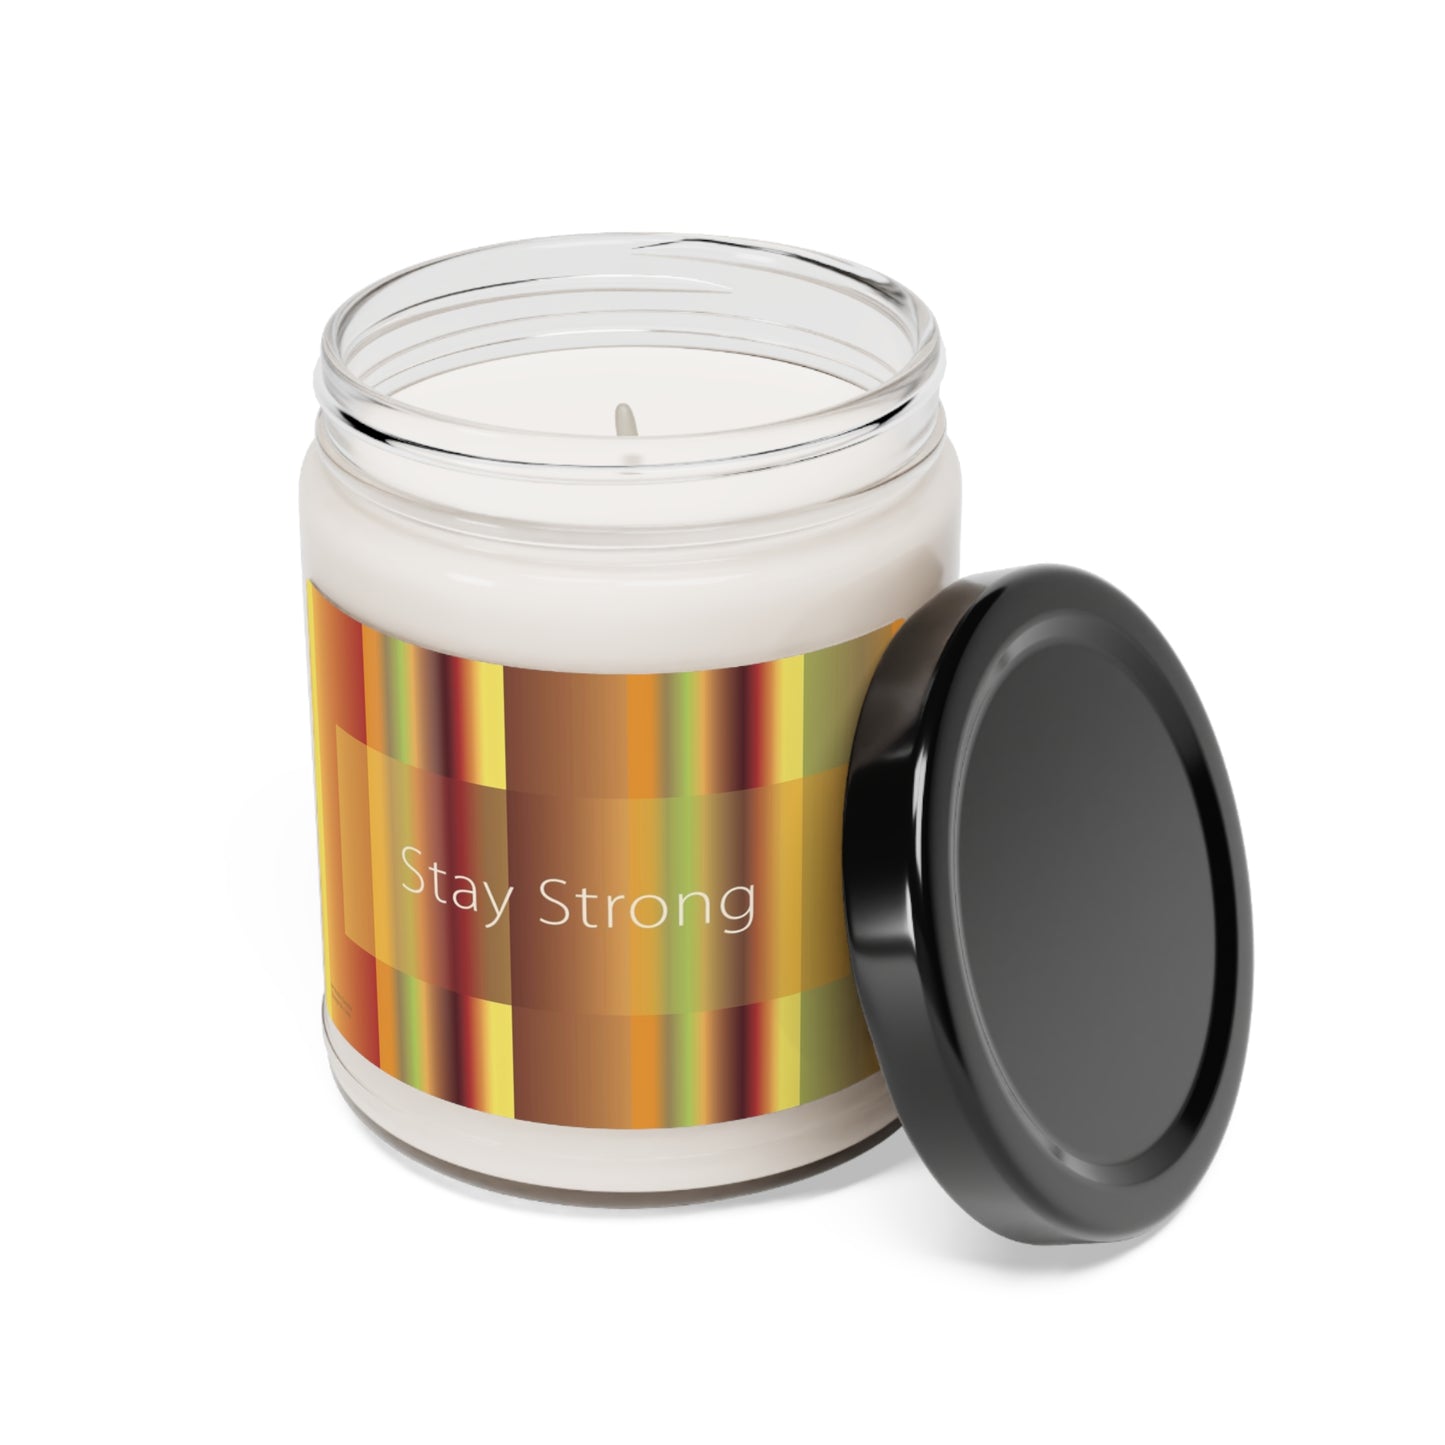 Scented Soy Candle, 9oz Stay Strong - Design No.1200